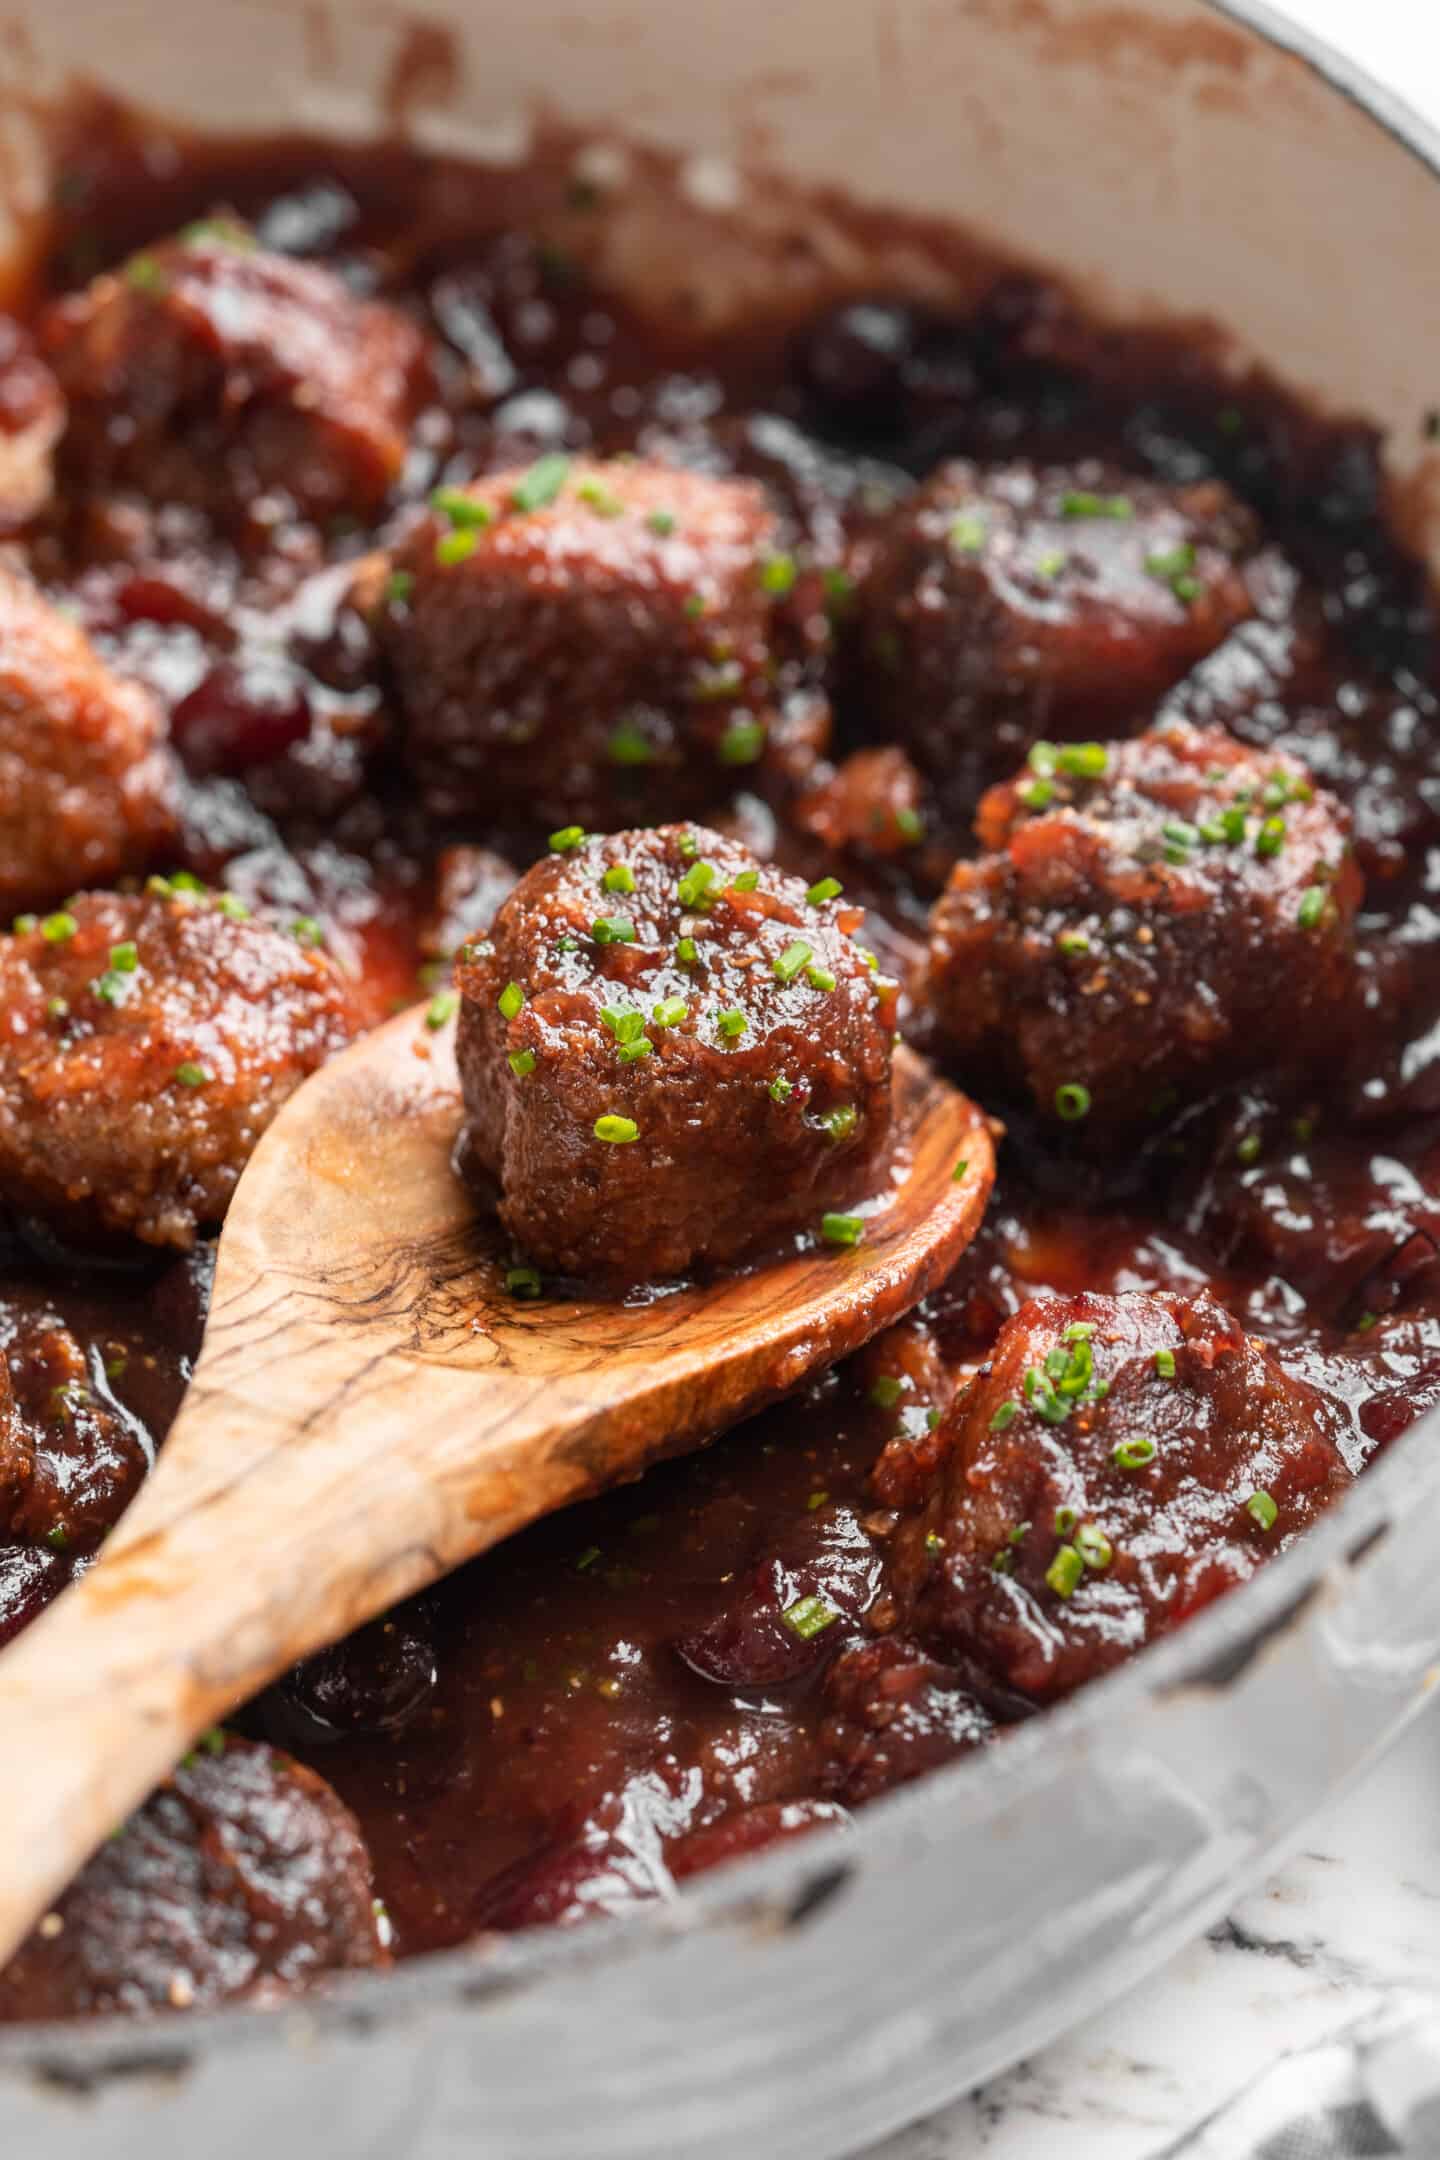 Skillet of vegan cranberry meatballs with wooden spoon lifting meatball from pan